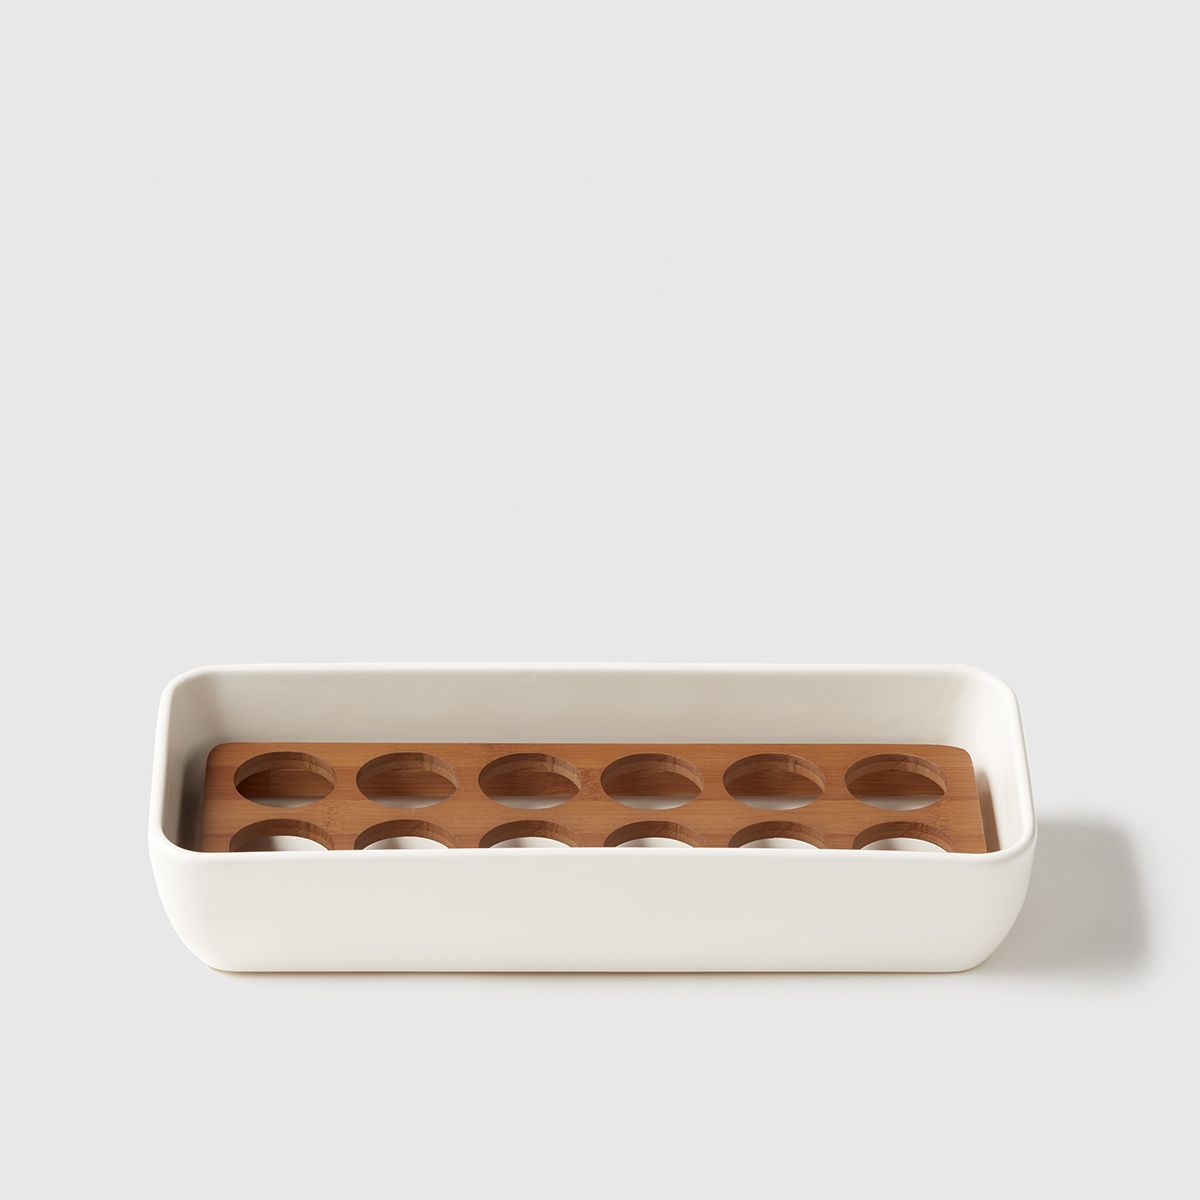 Ceramic and Bamboo Egg Bin | The Container Store